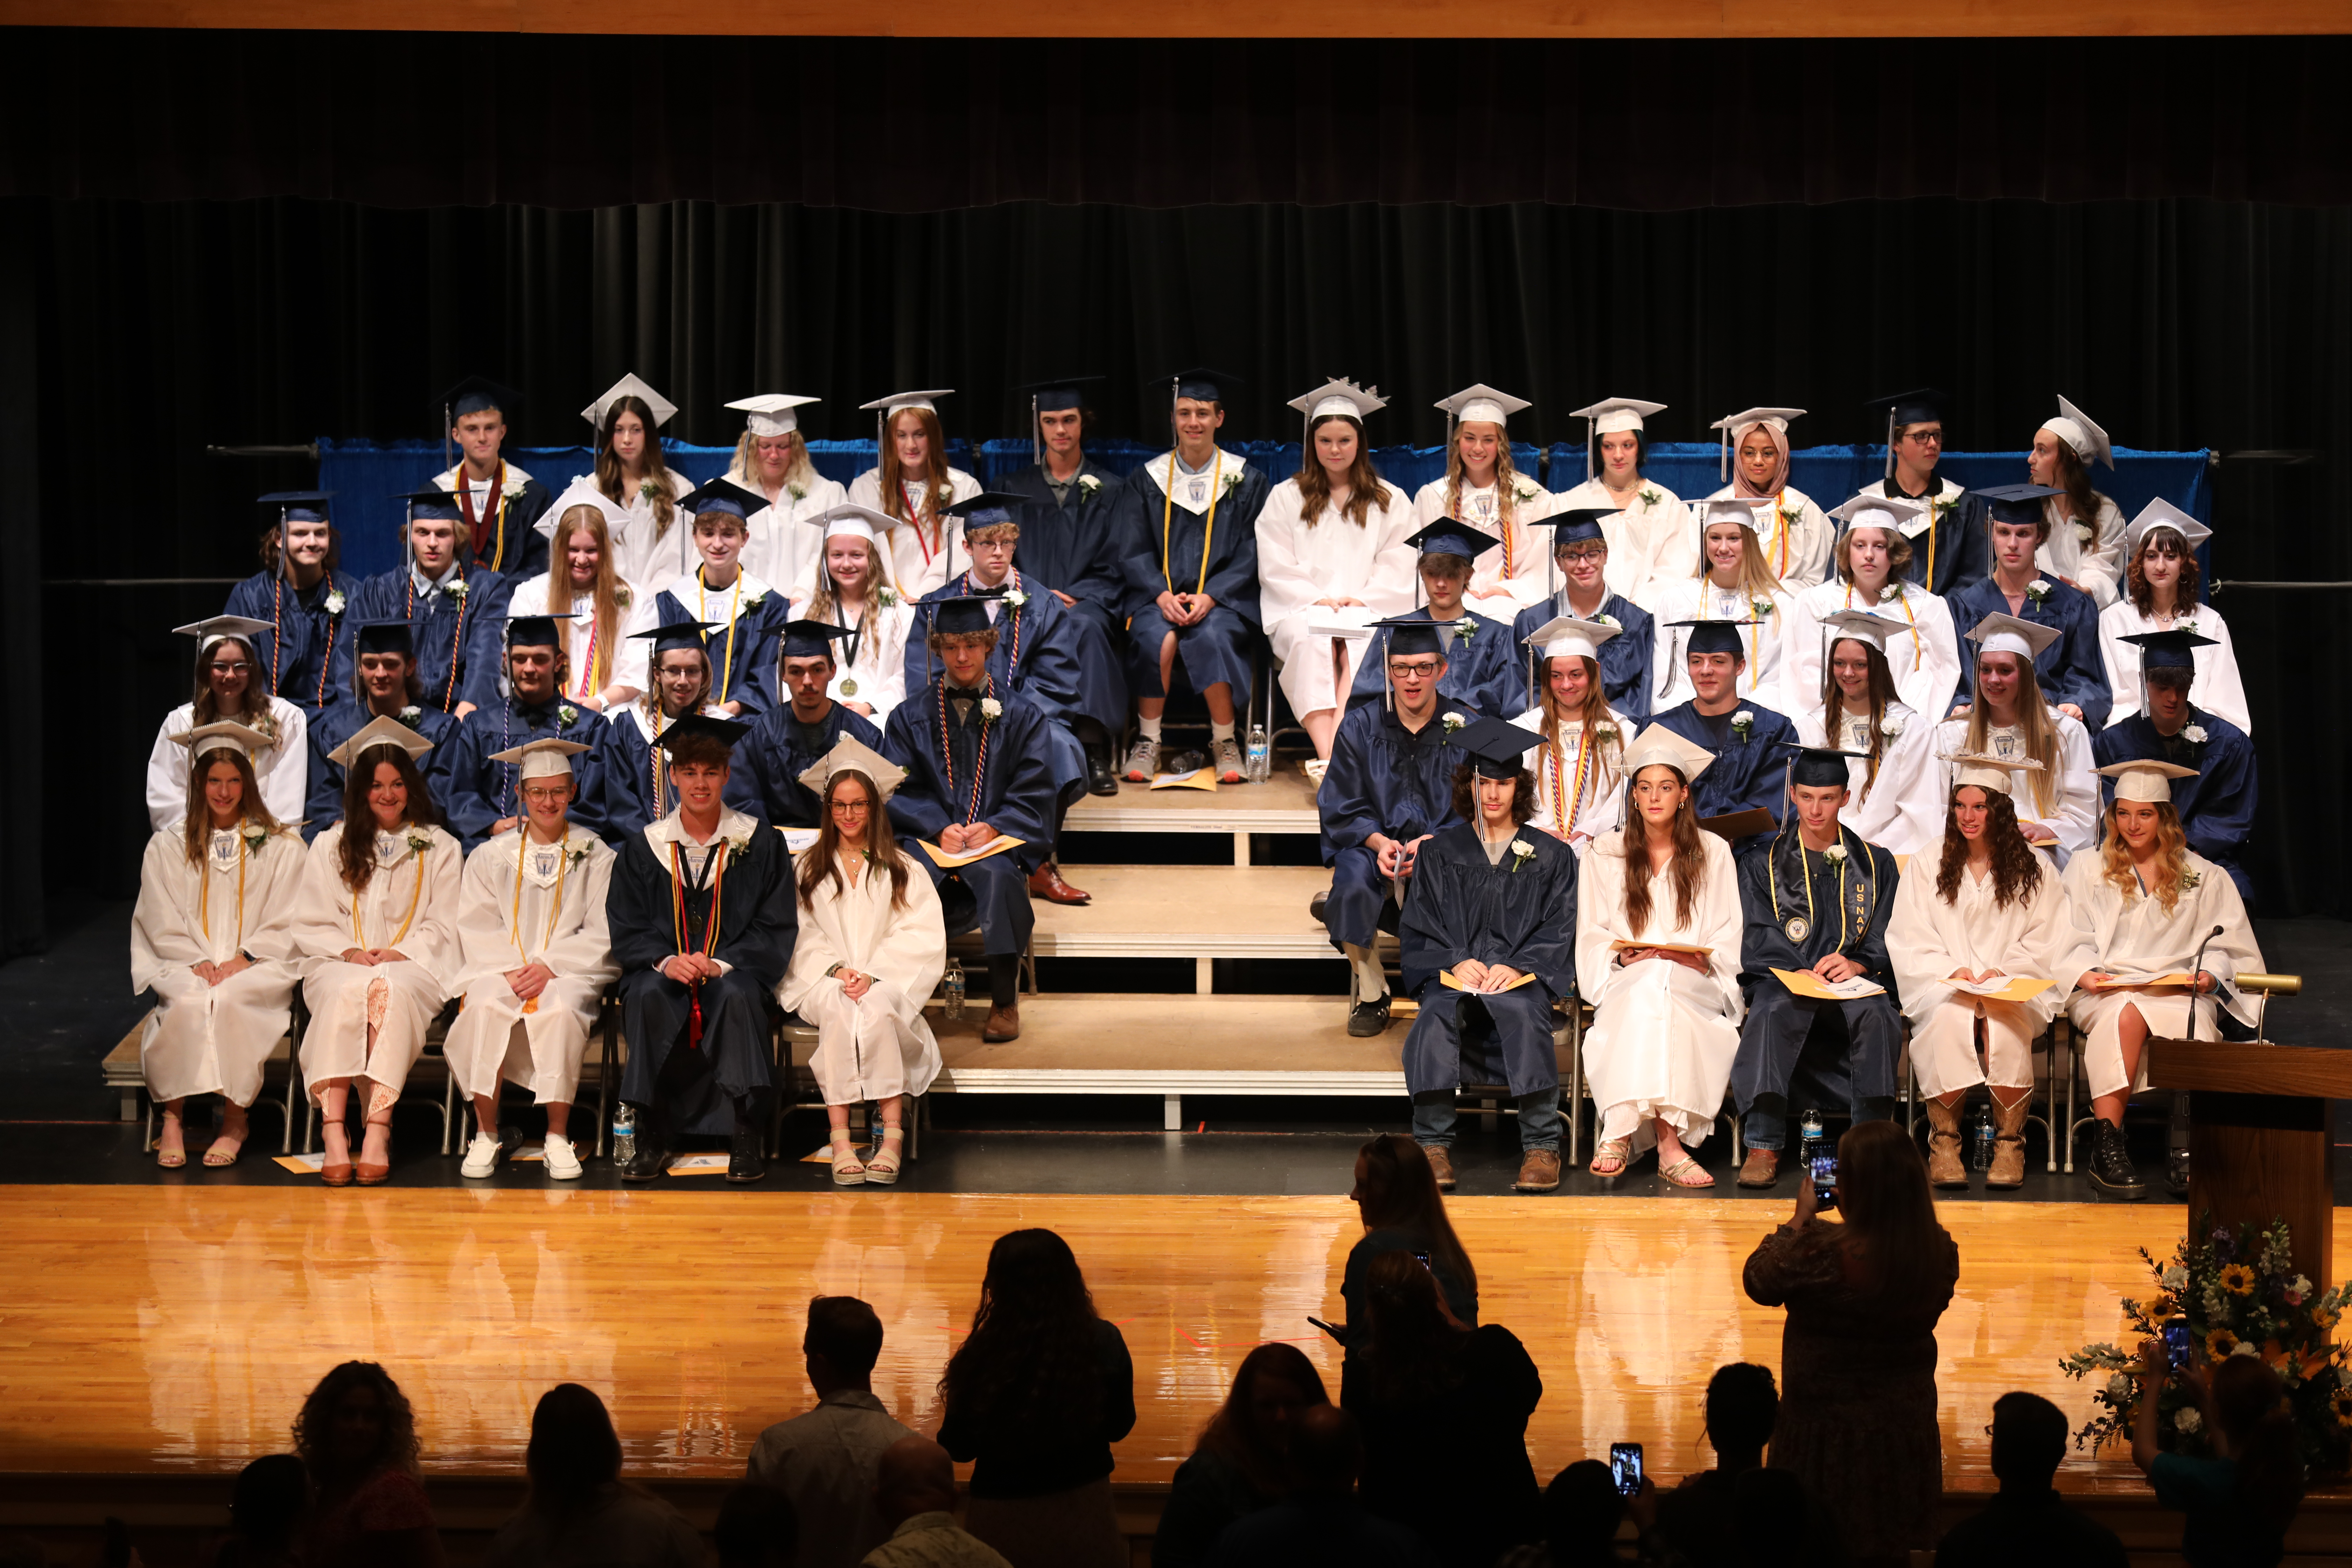 The Class of 2023 assembled on the stage at graduation. Some students are wearing white caps and gowns and some are wearing blue caps and gowns